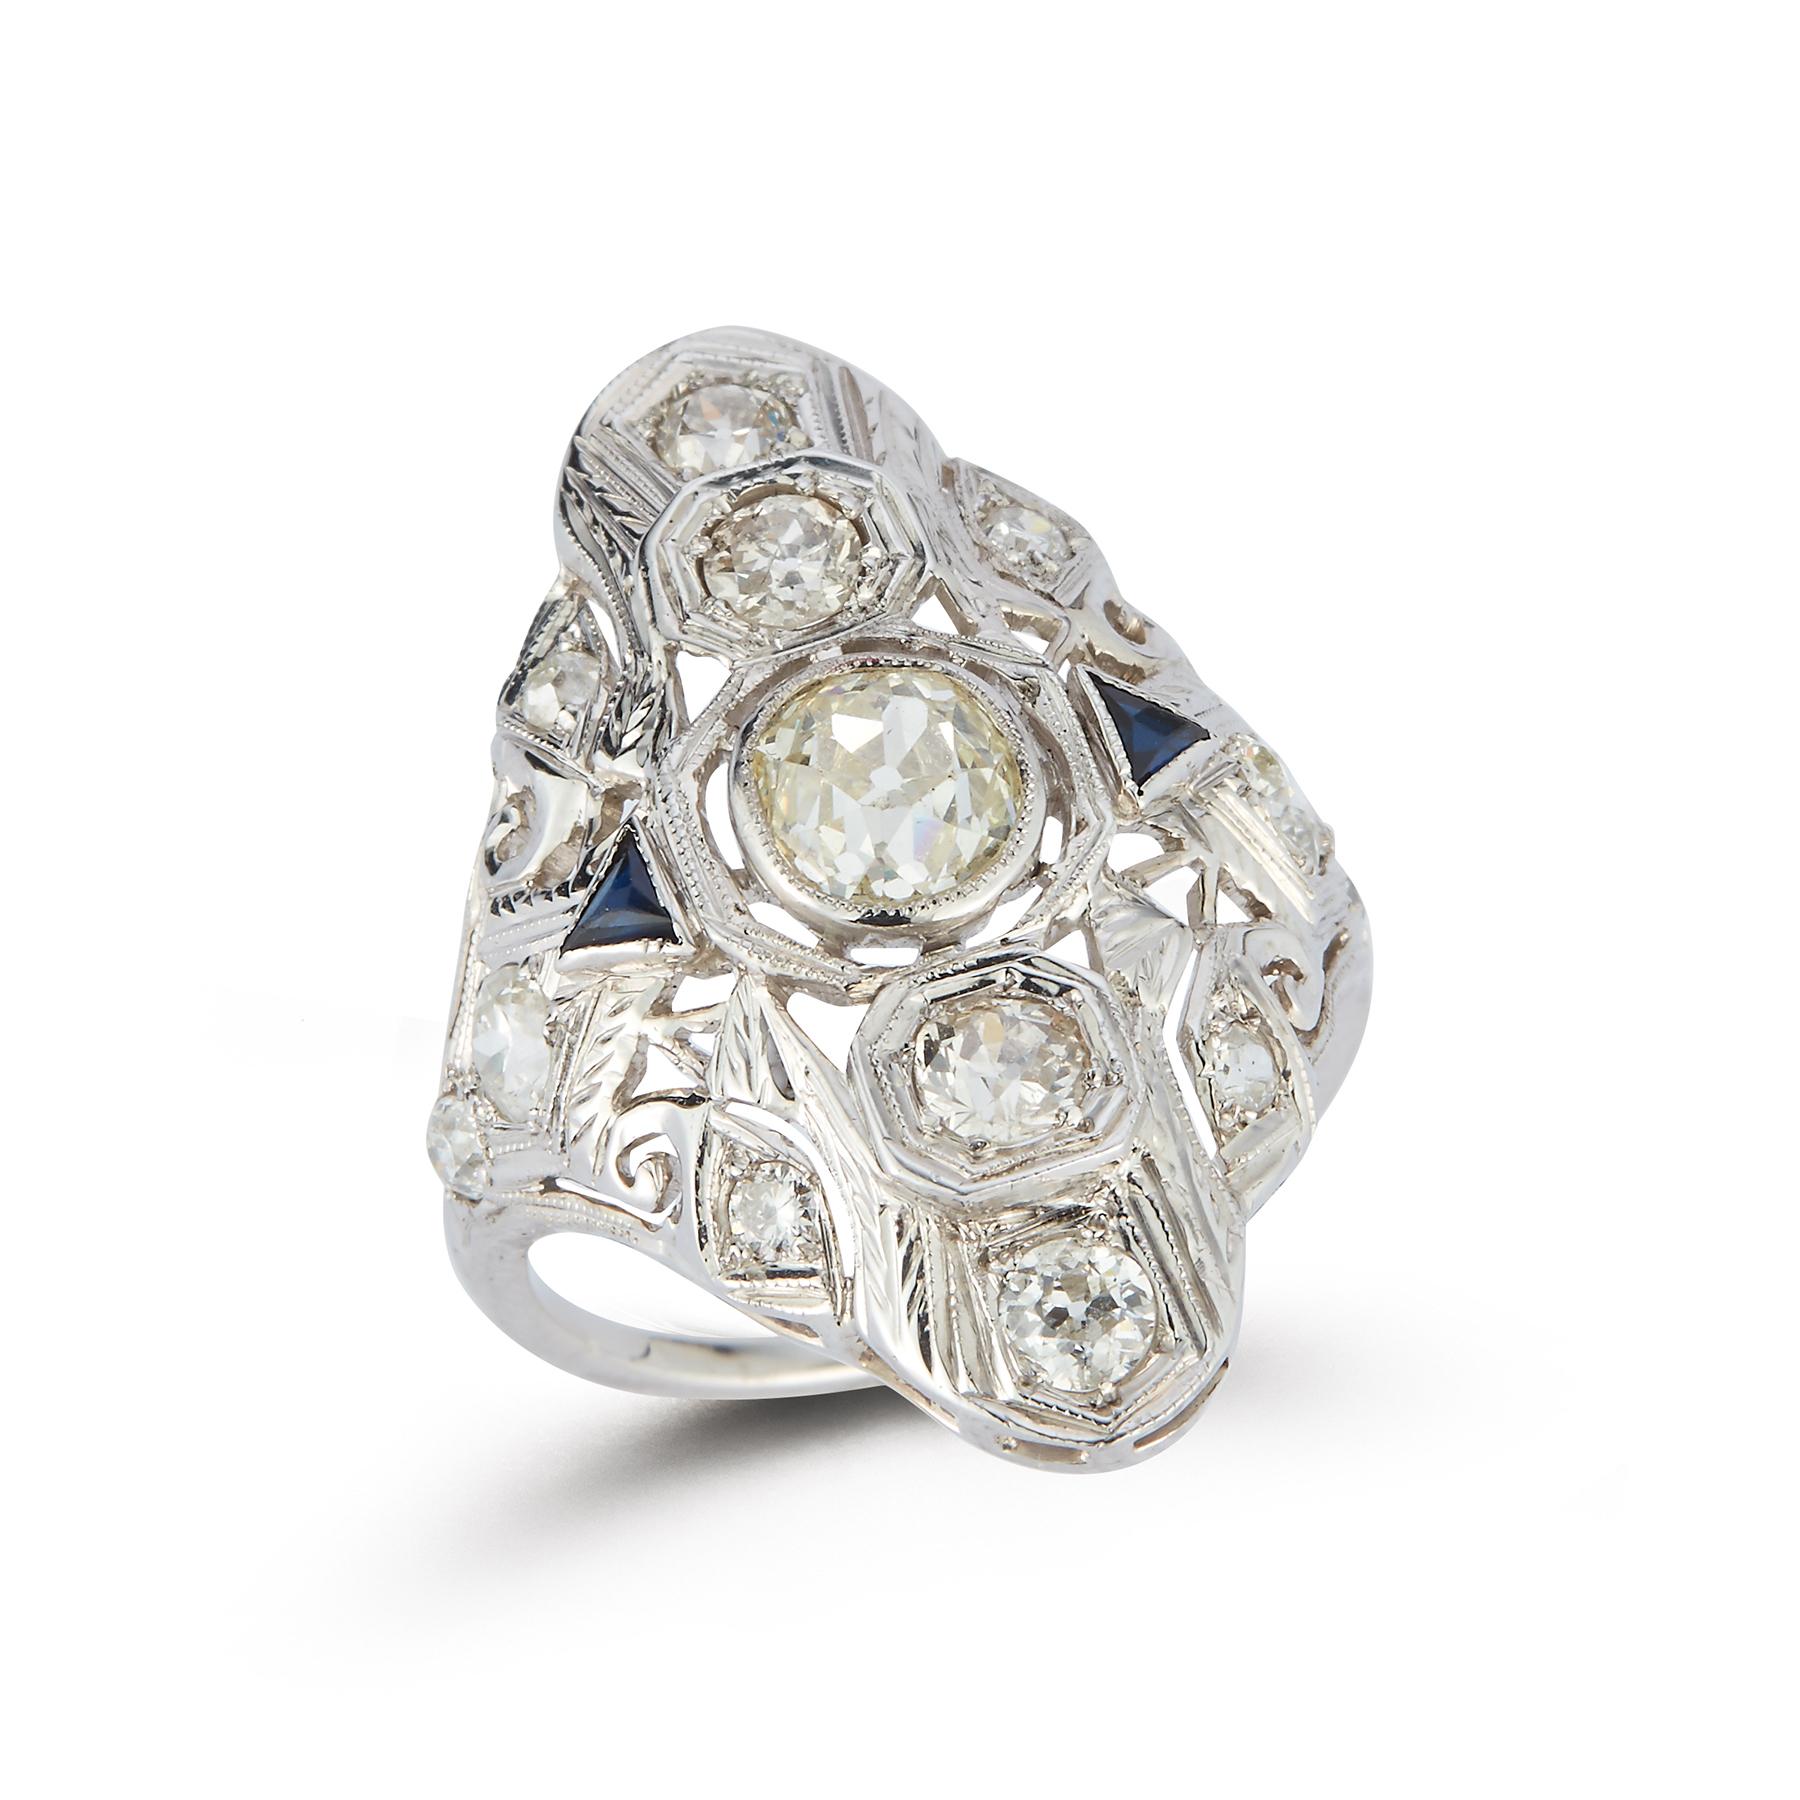 Art Deco Three Stone Diamond Ring
1 Old Mine Diamond approximately  1.07 carats, 12 Old Mine diamonds approximately 1.40 carat, 2 synthetic sapphires all set in 14K white gold 
Ring Size: 6.75
Resizable free of charge 
